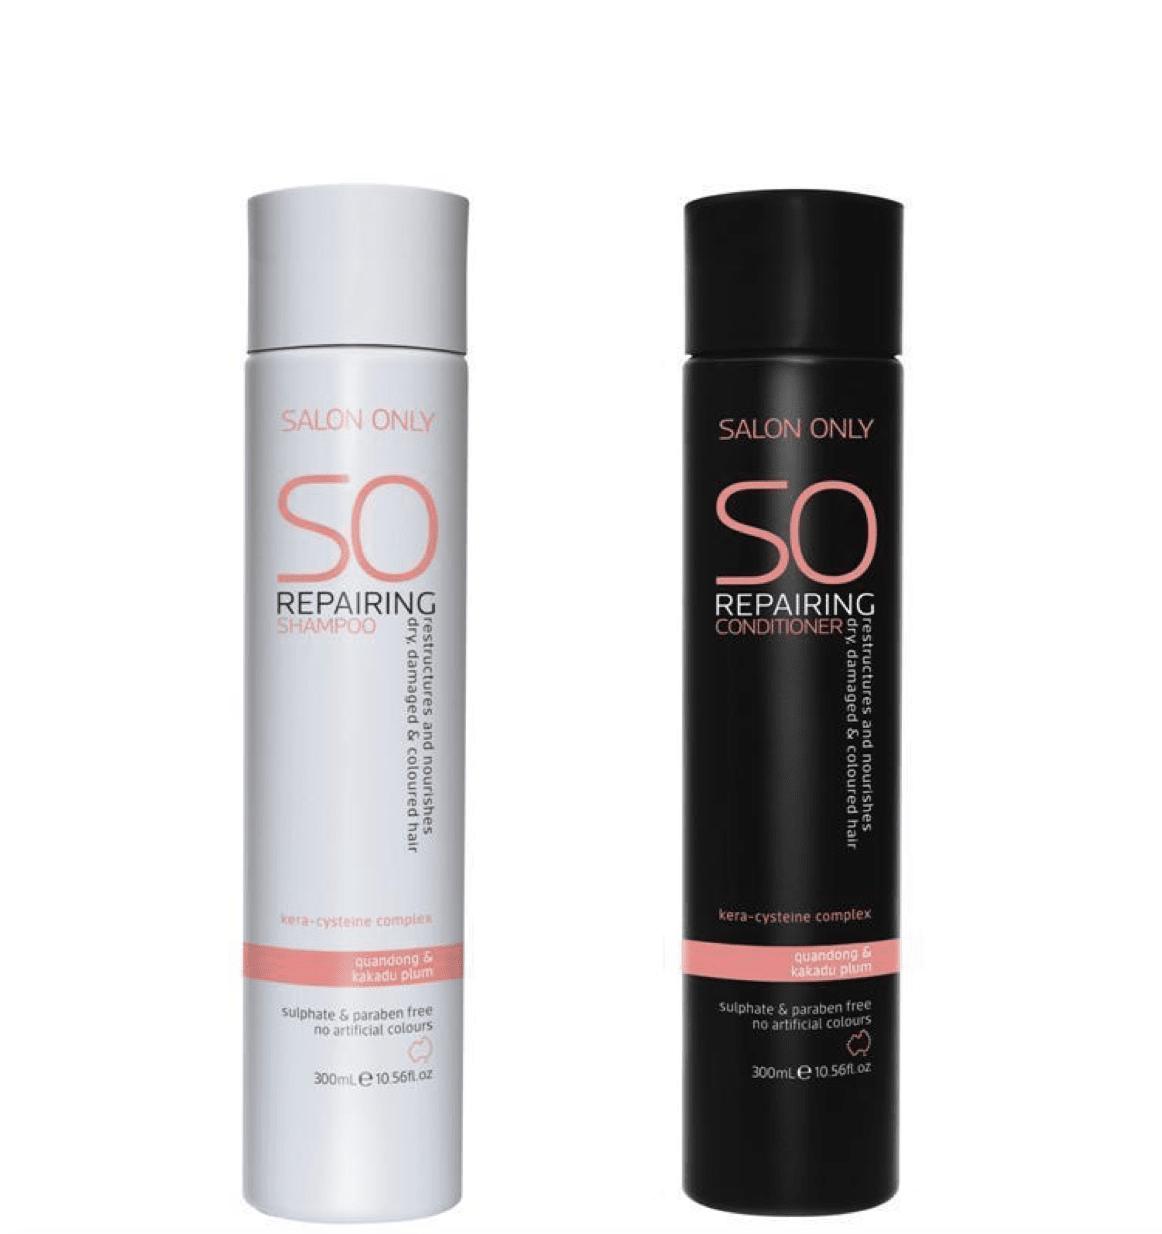 Salon Only Repairing Shampoo and Conditioner 300ml